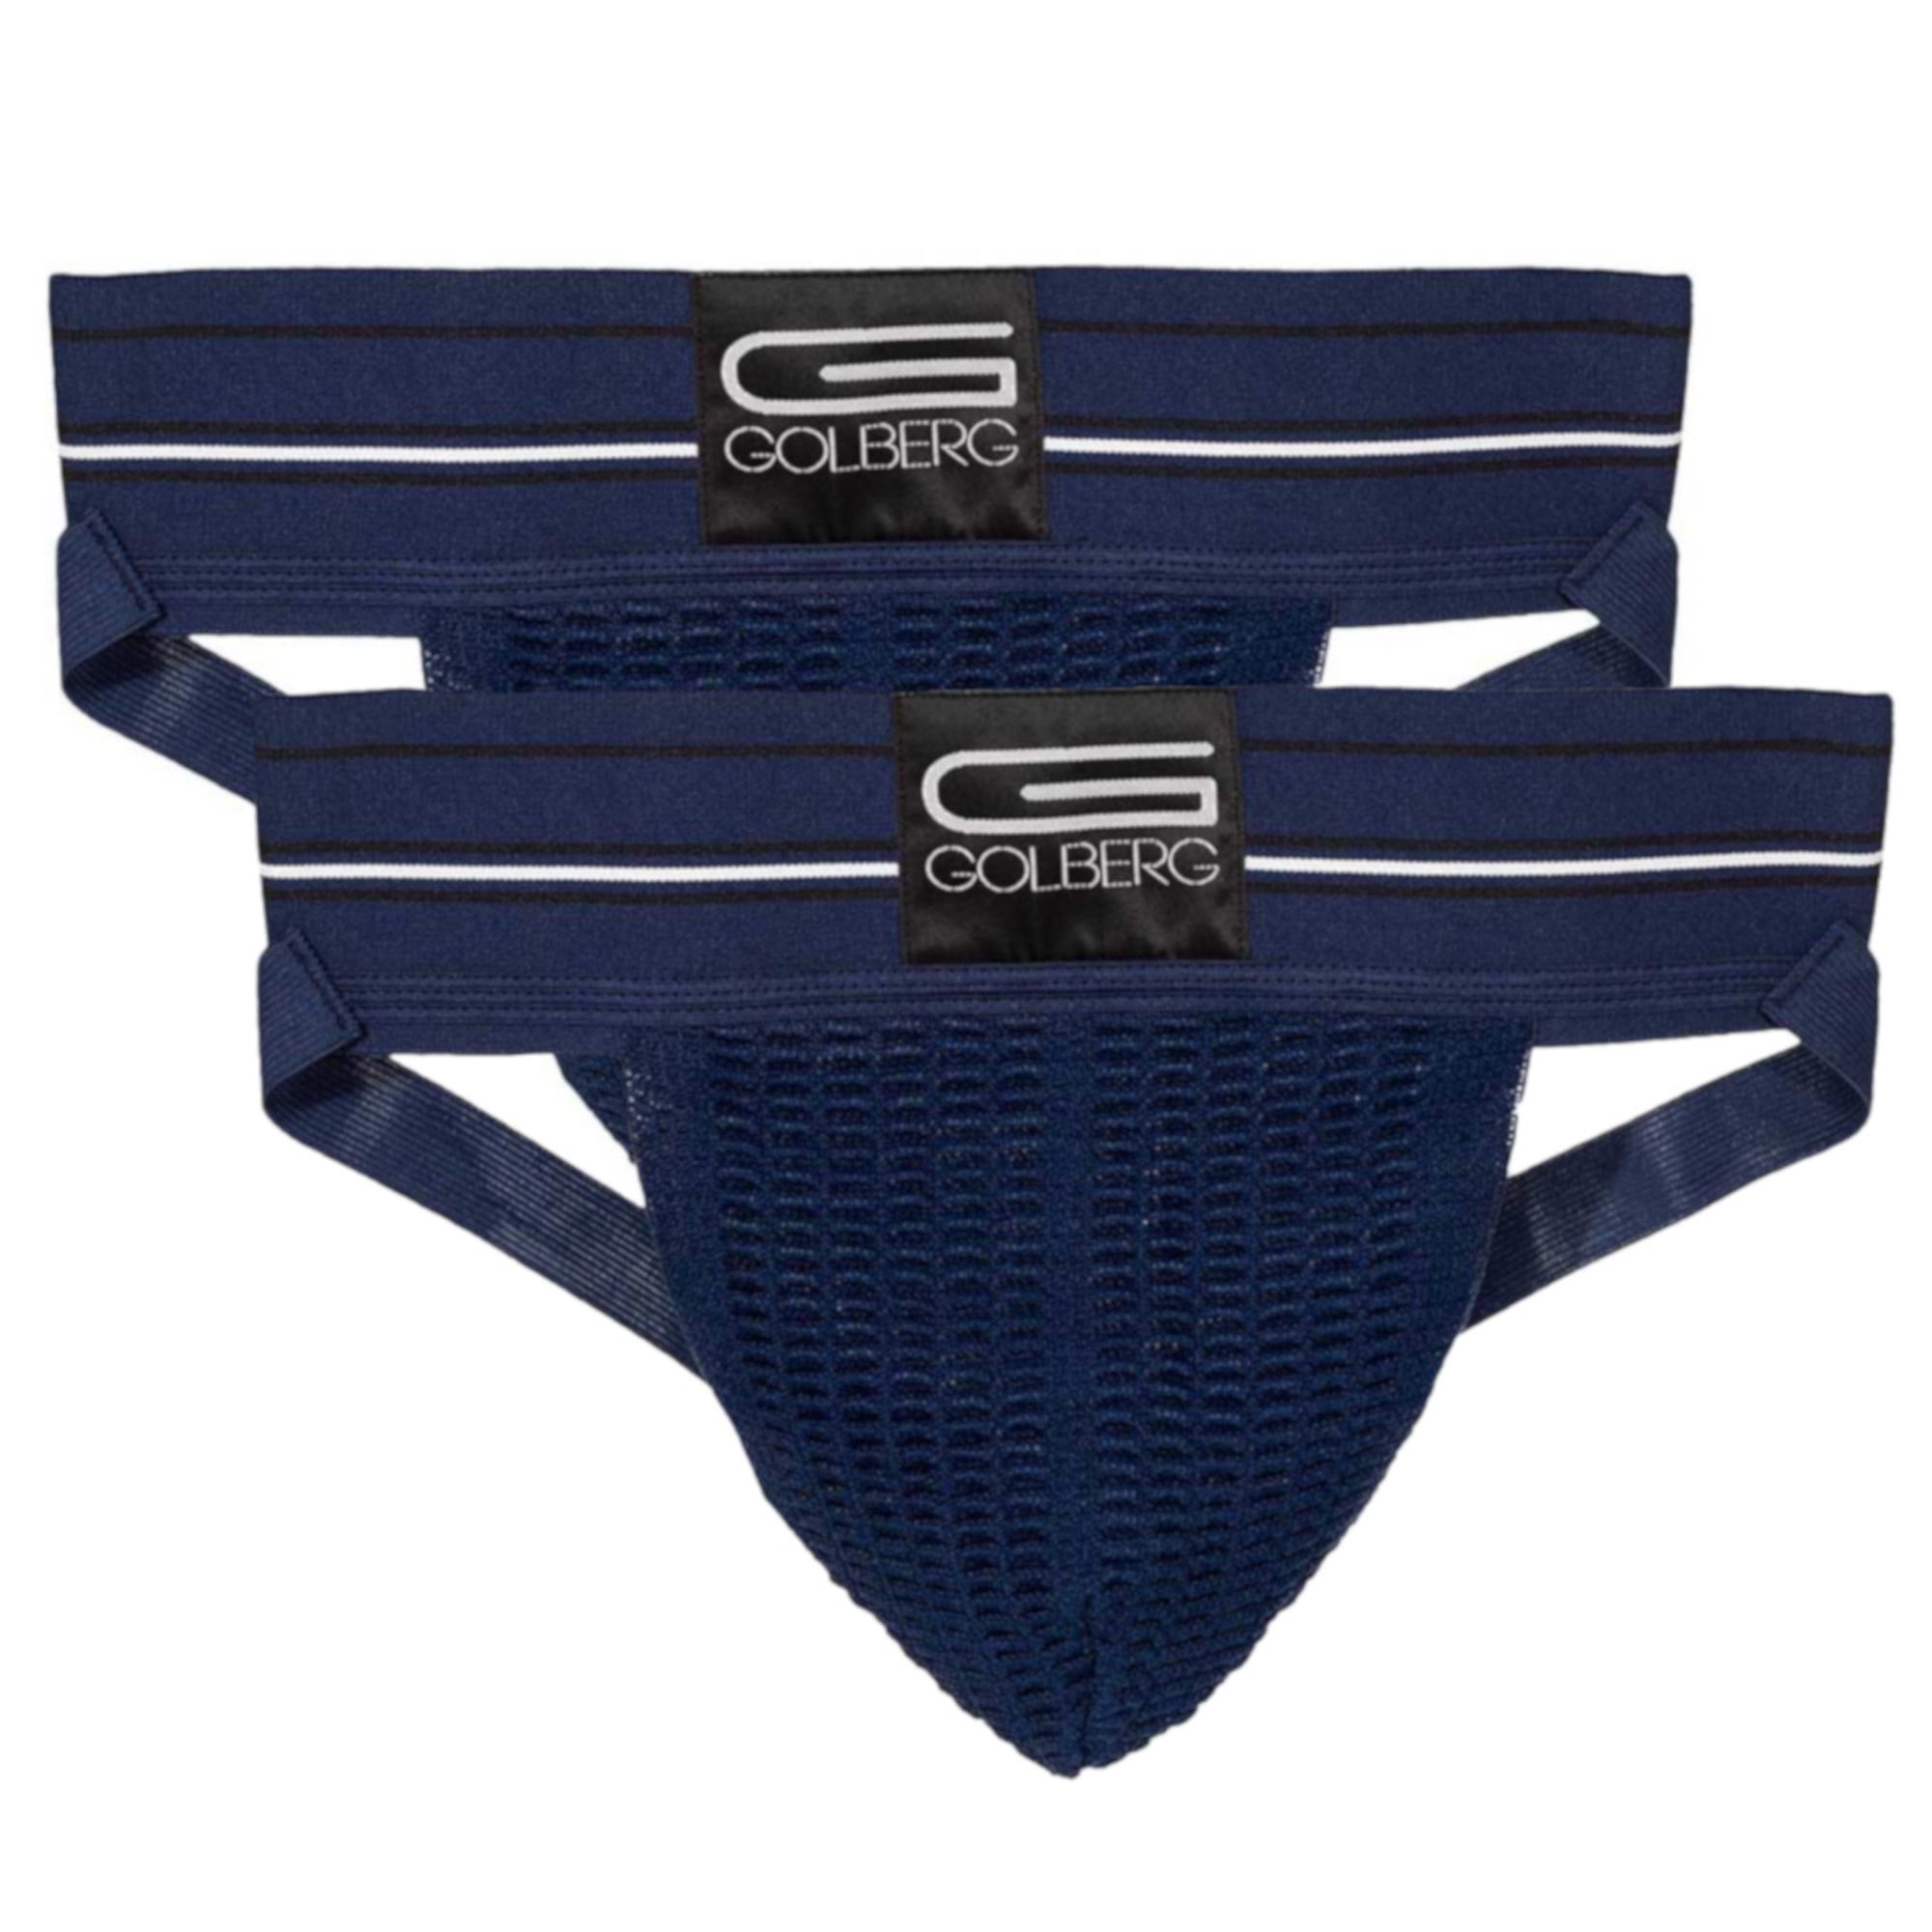 GOLBERG G Men’s Athletic Supporter Multiple Sizes & Colors Contoured Waistband for Comfort 